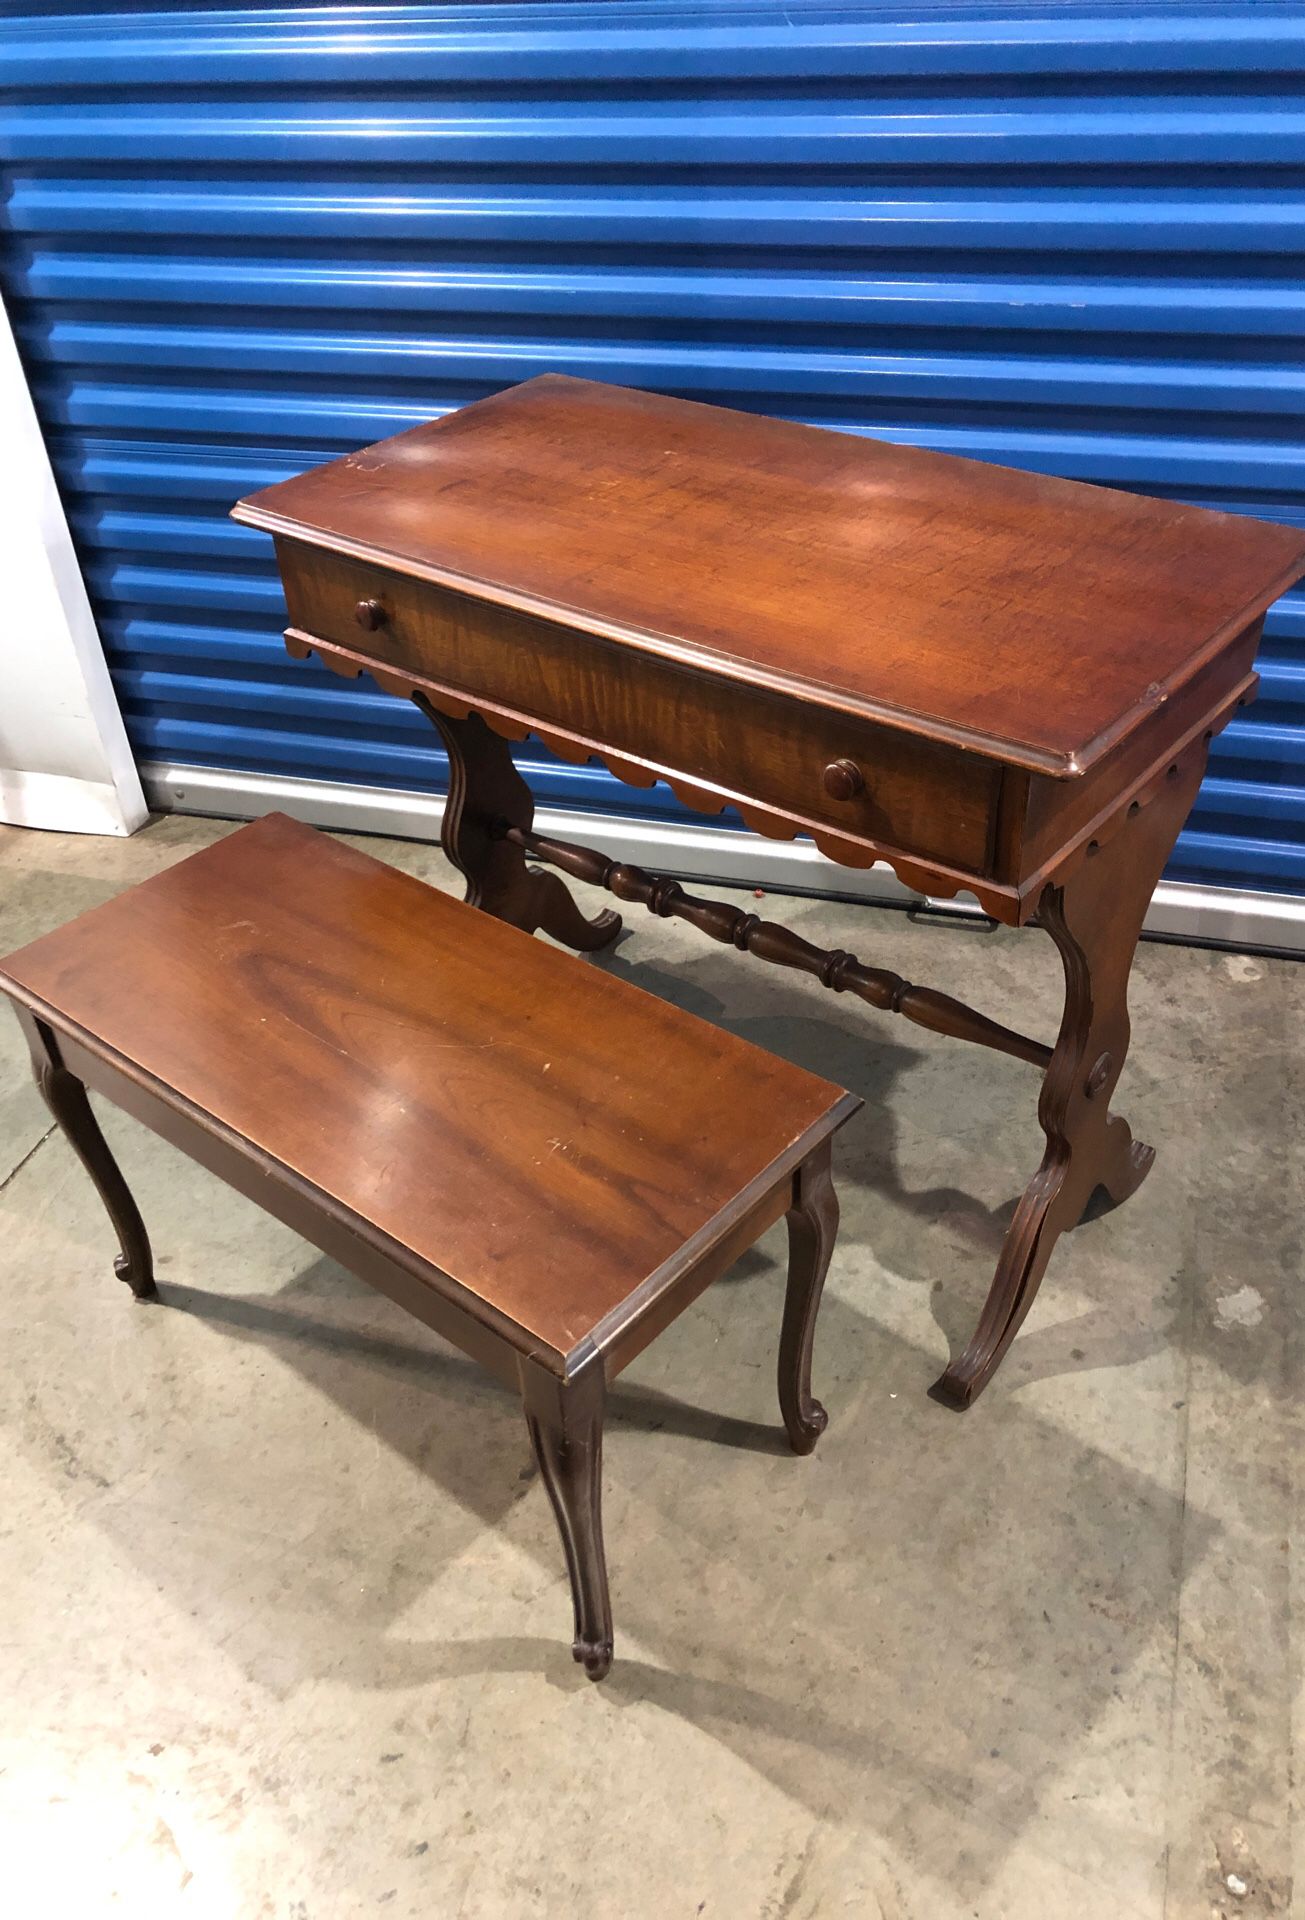 Antique sitting desk with bench